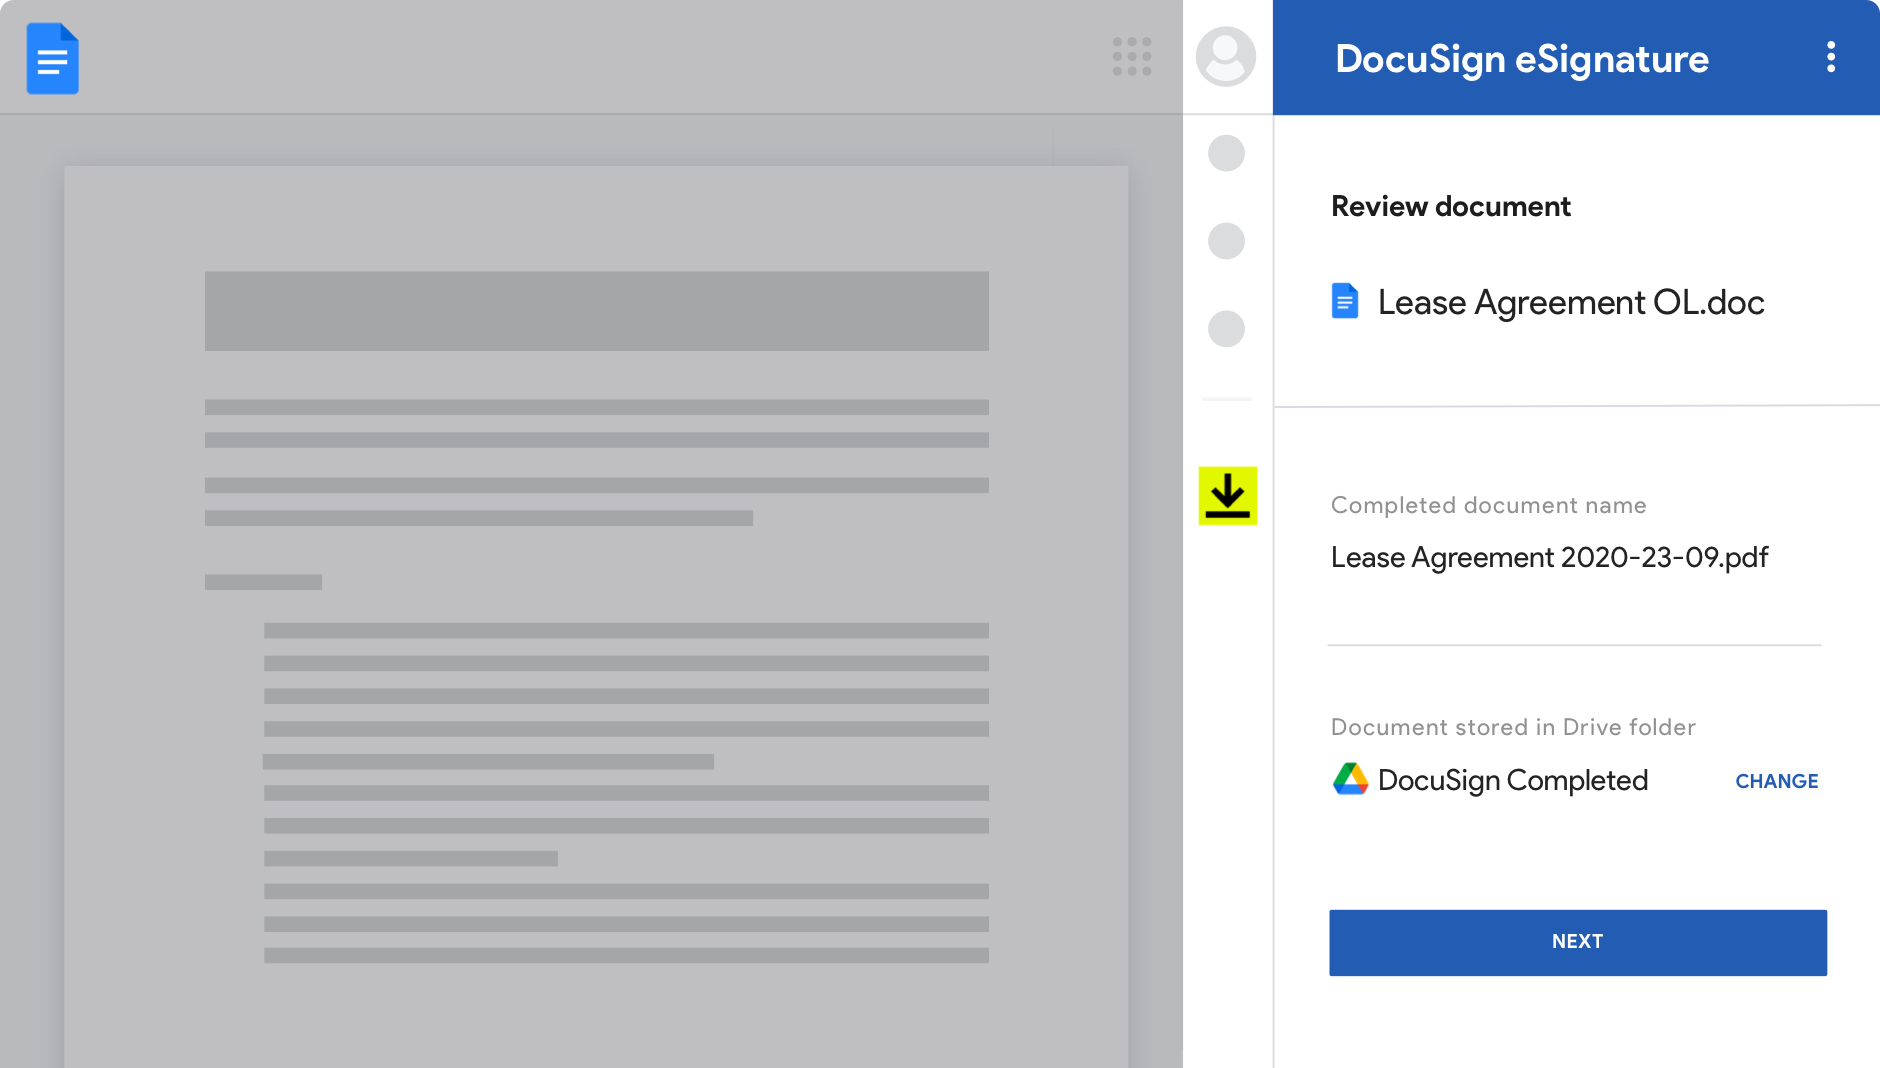 Google Docs with DocuSign eSignature showing agreements and their status.